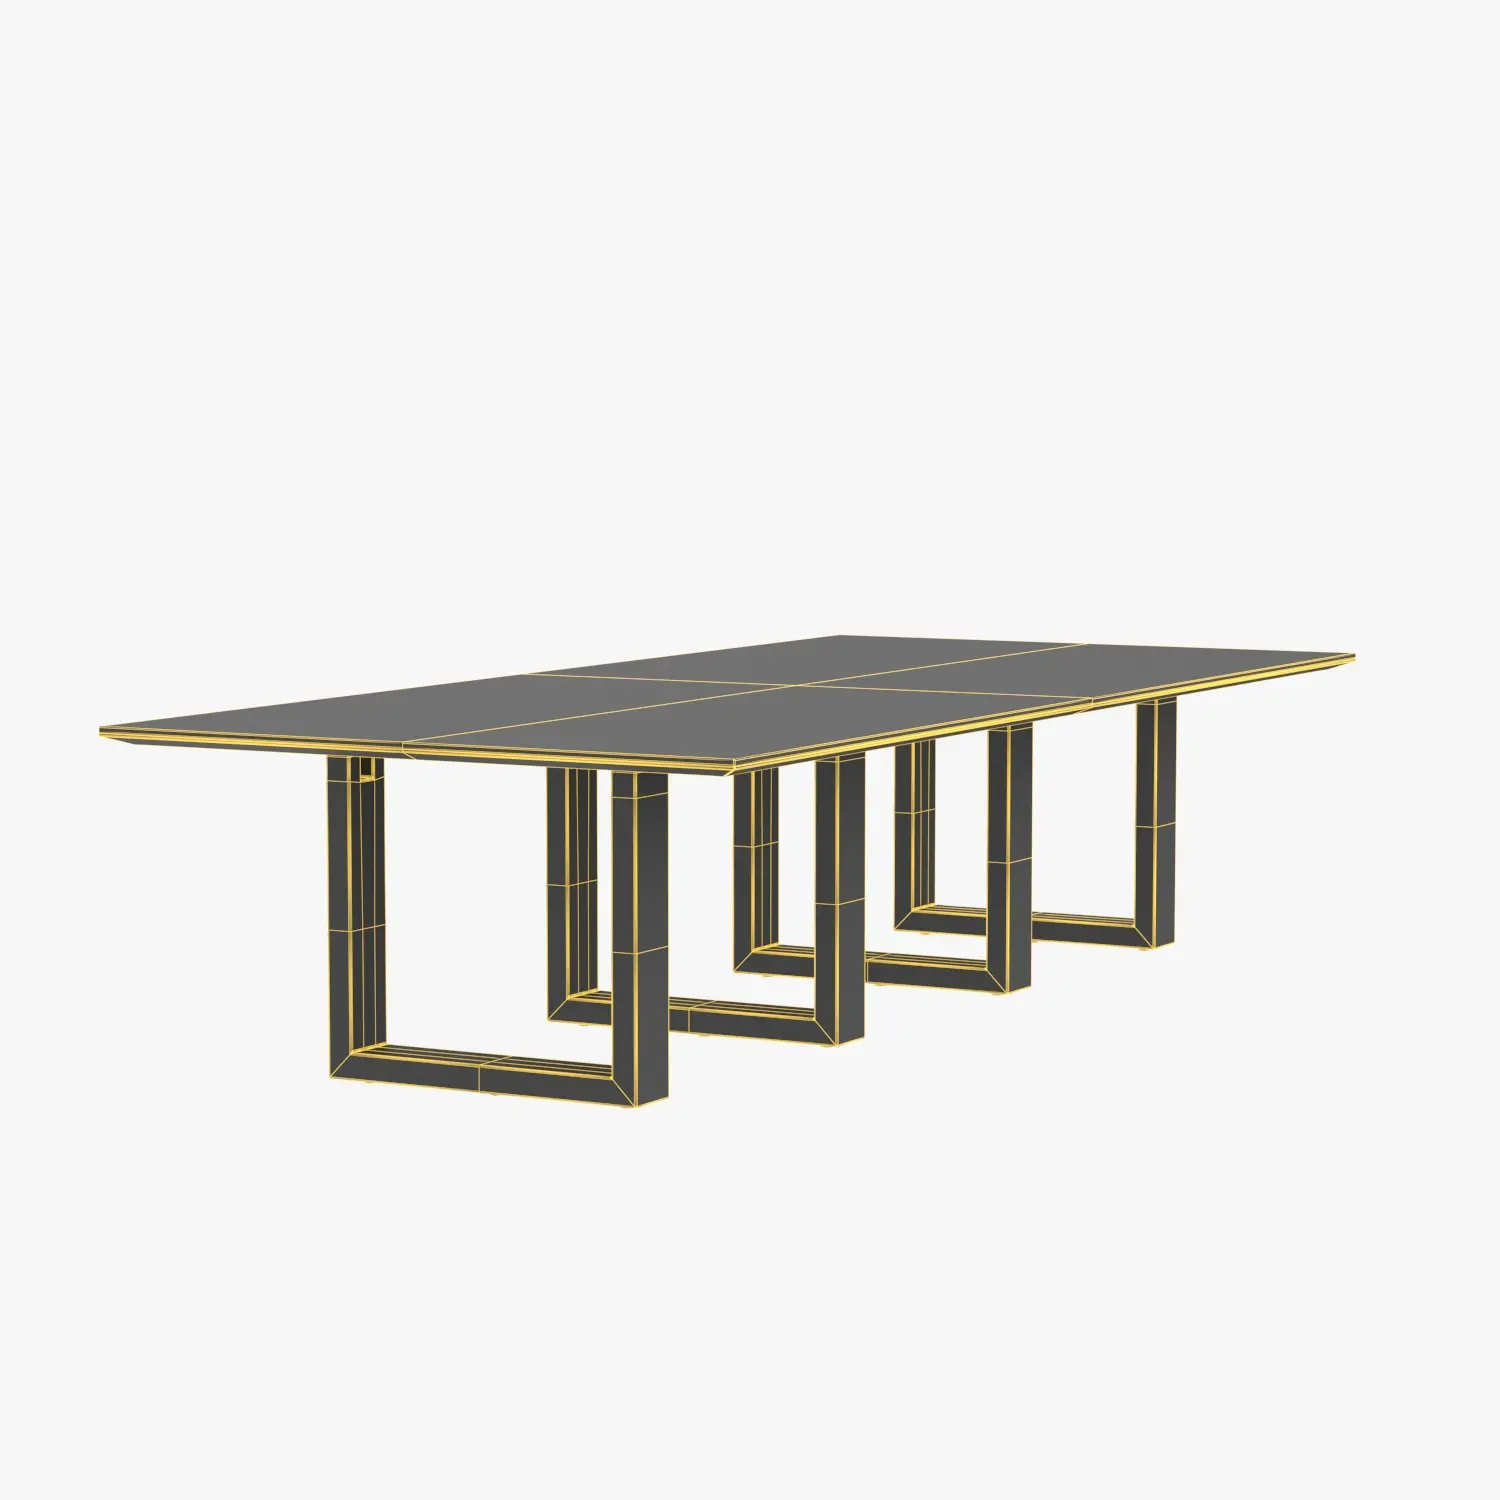 Statement Blends Natural Finishes Conference Table 3D Model_07